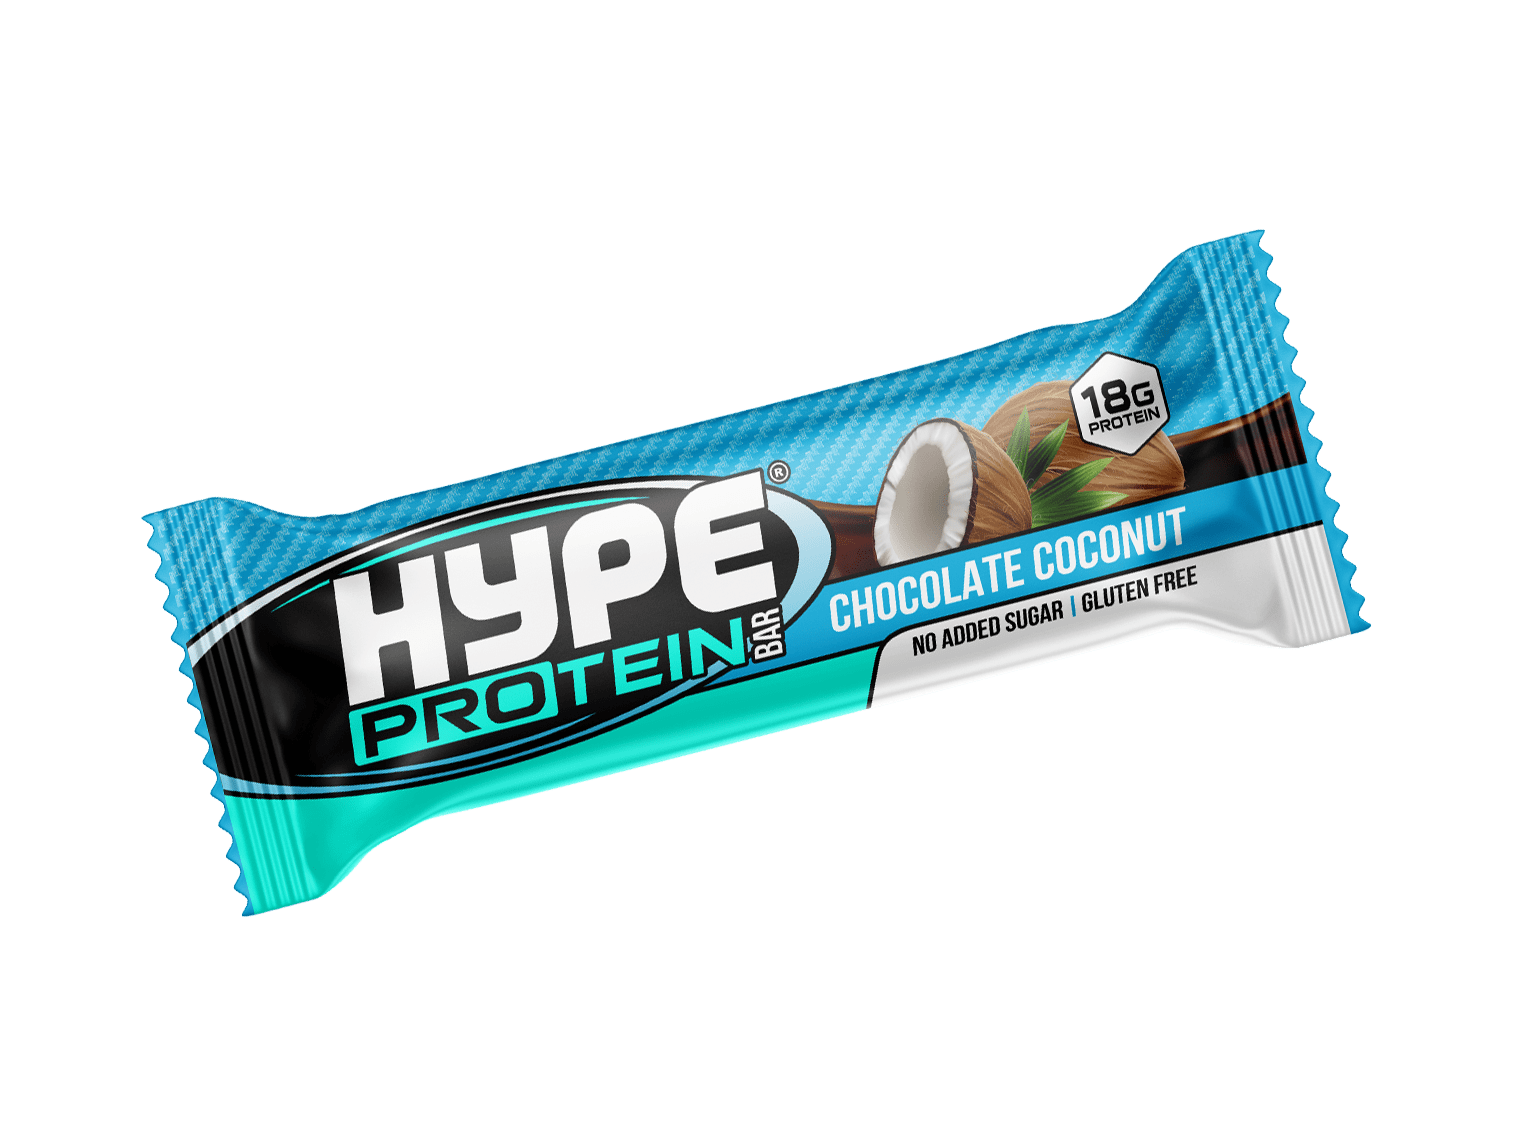 Hype’s protein bar, “chocolate coconut” flavoured.